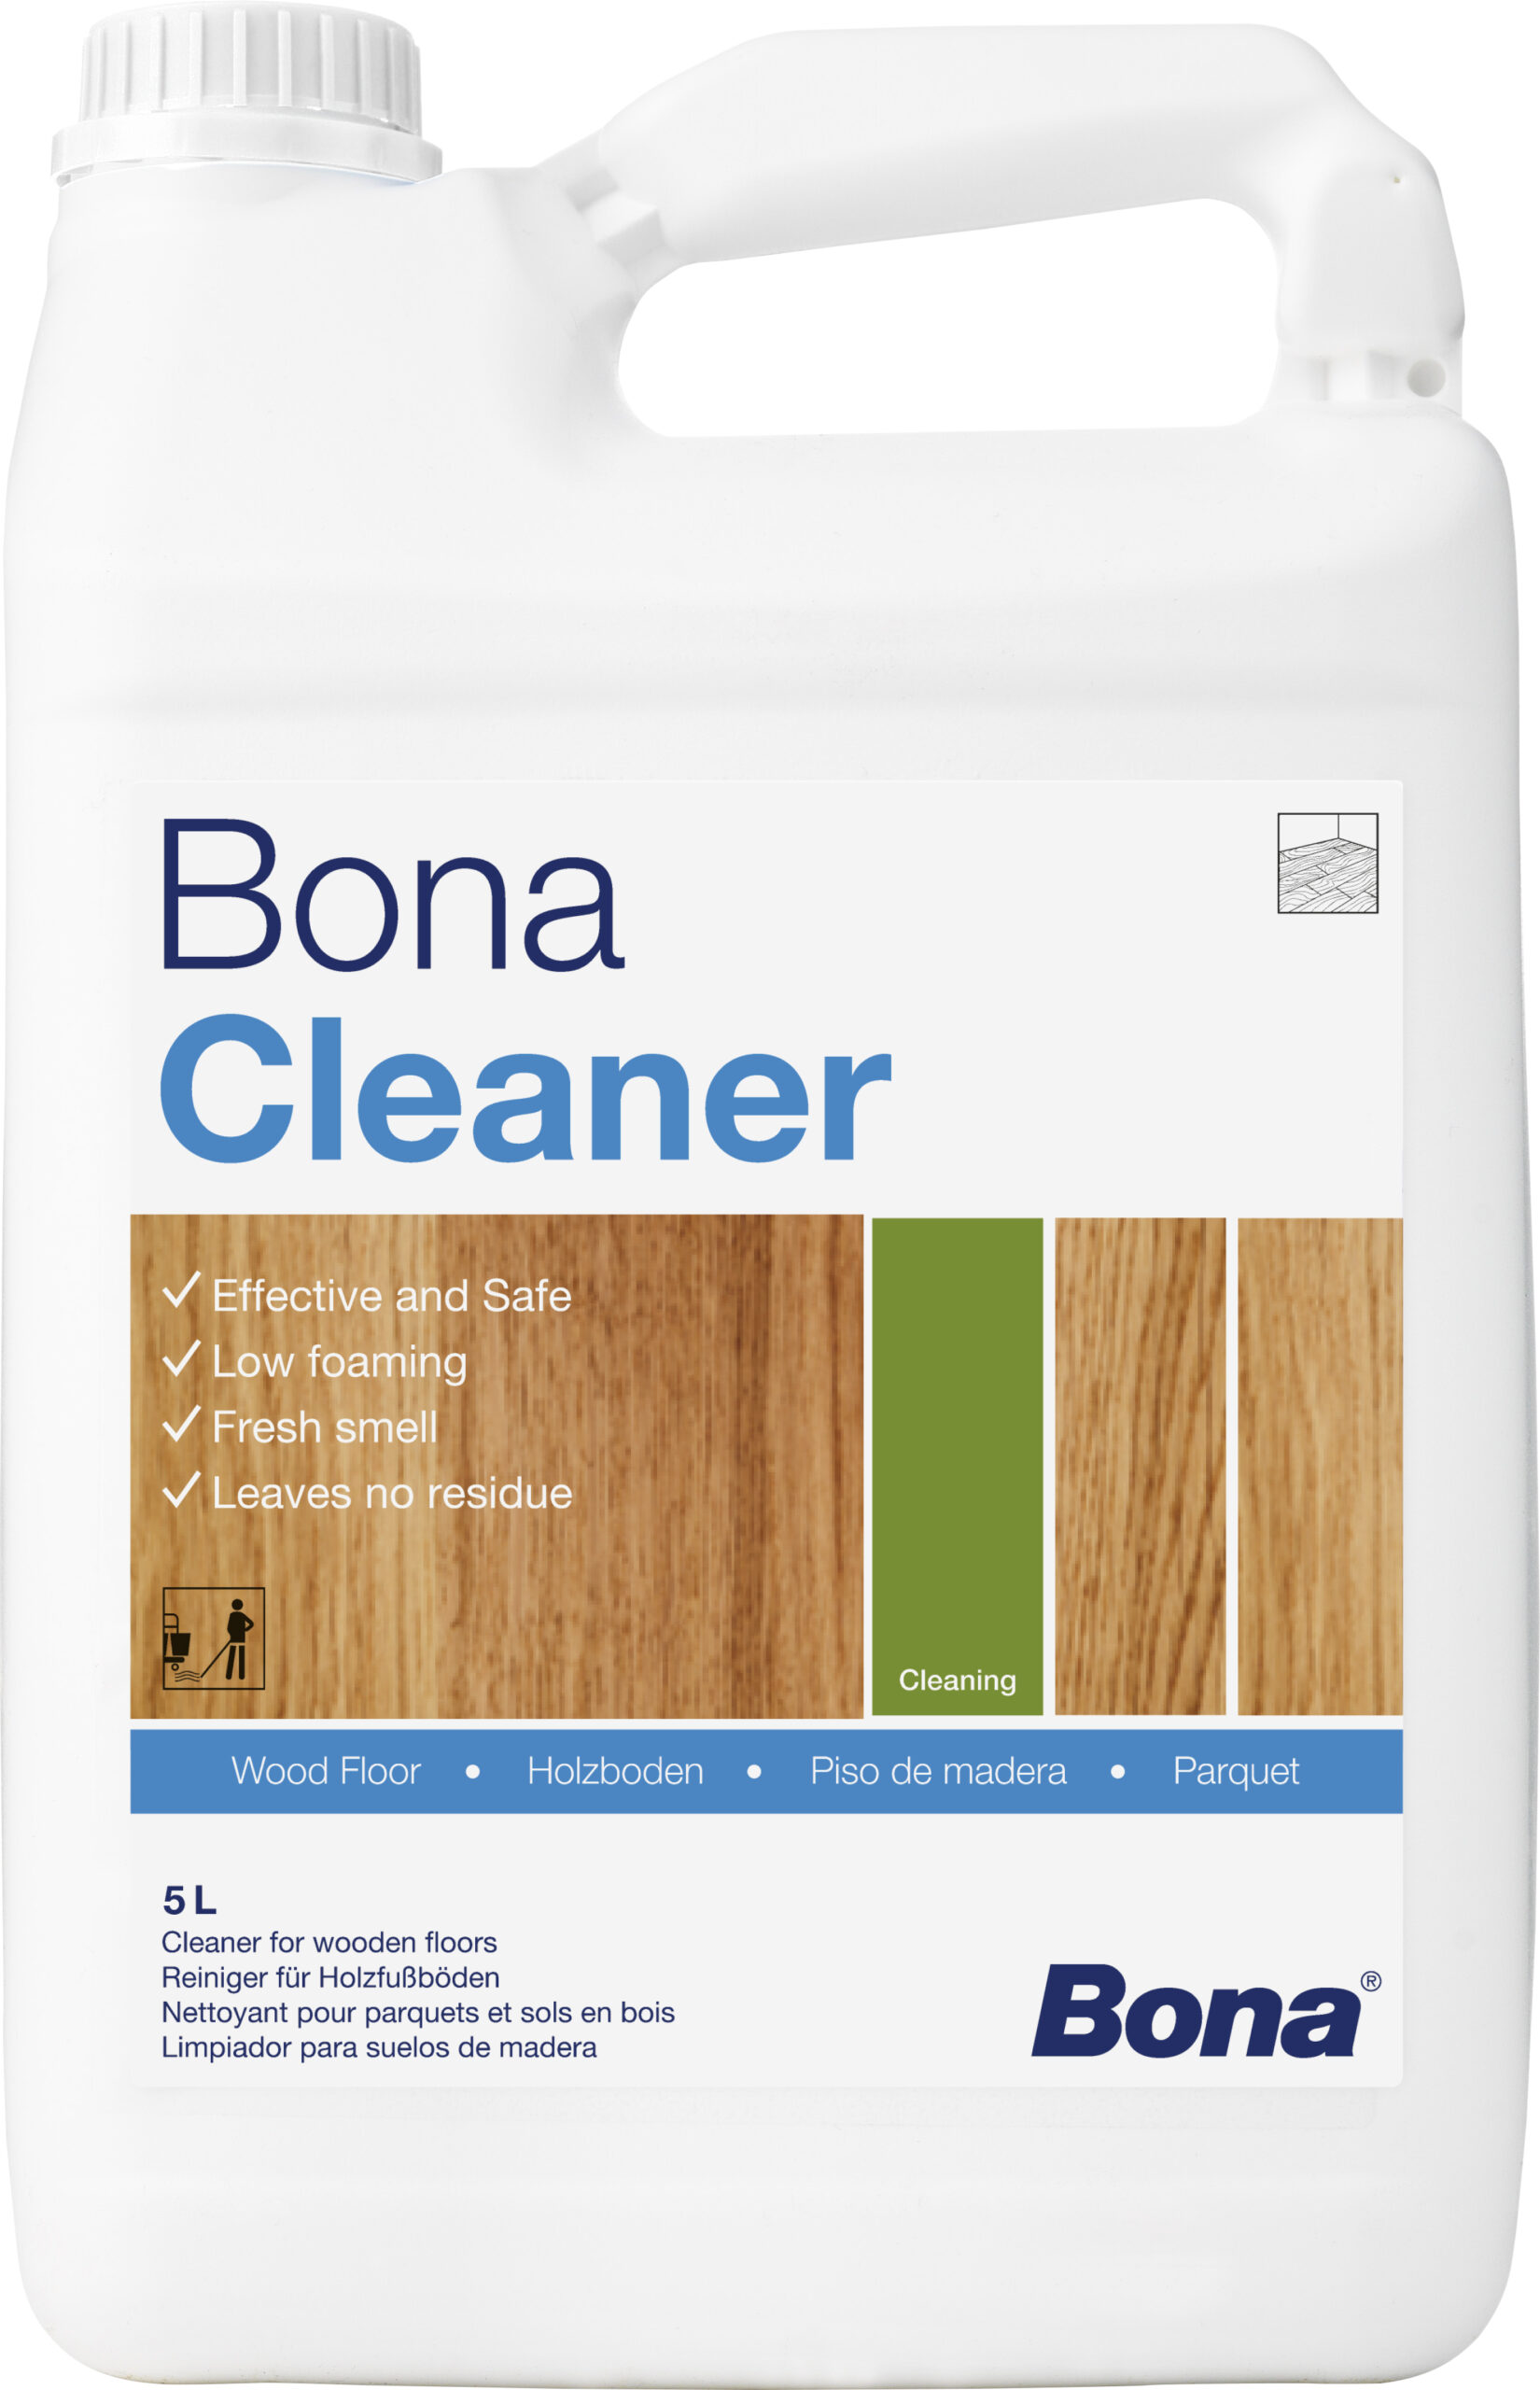 Bona Parquet Cleaner 5 Ltr - The Natural Wood Floor Co